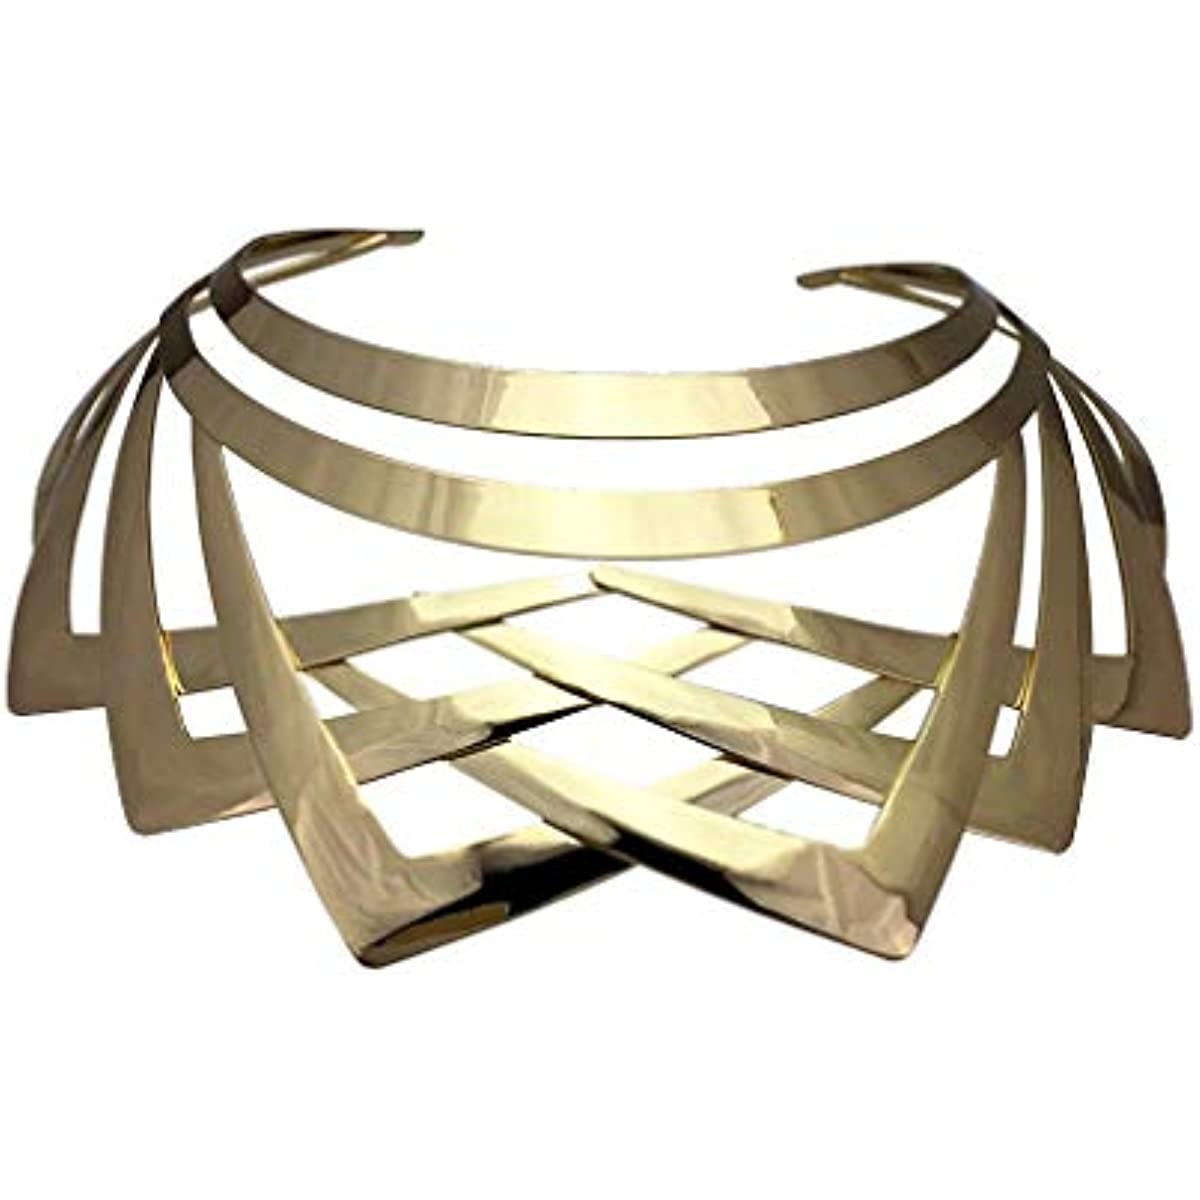 Angles- the Metal Artwork Collar Necklace 2 Colors